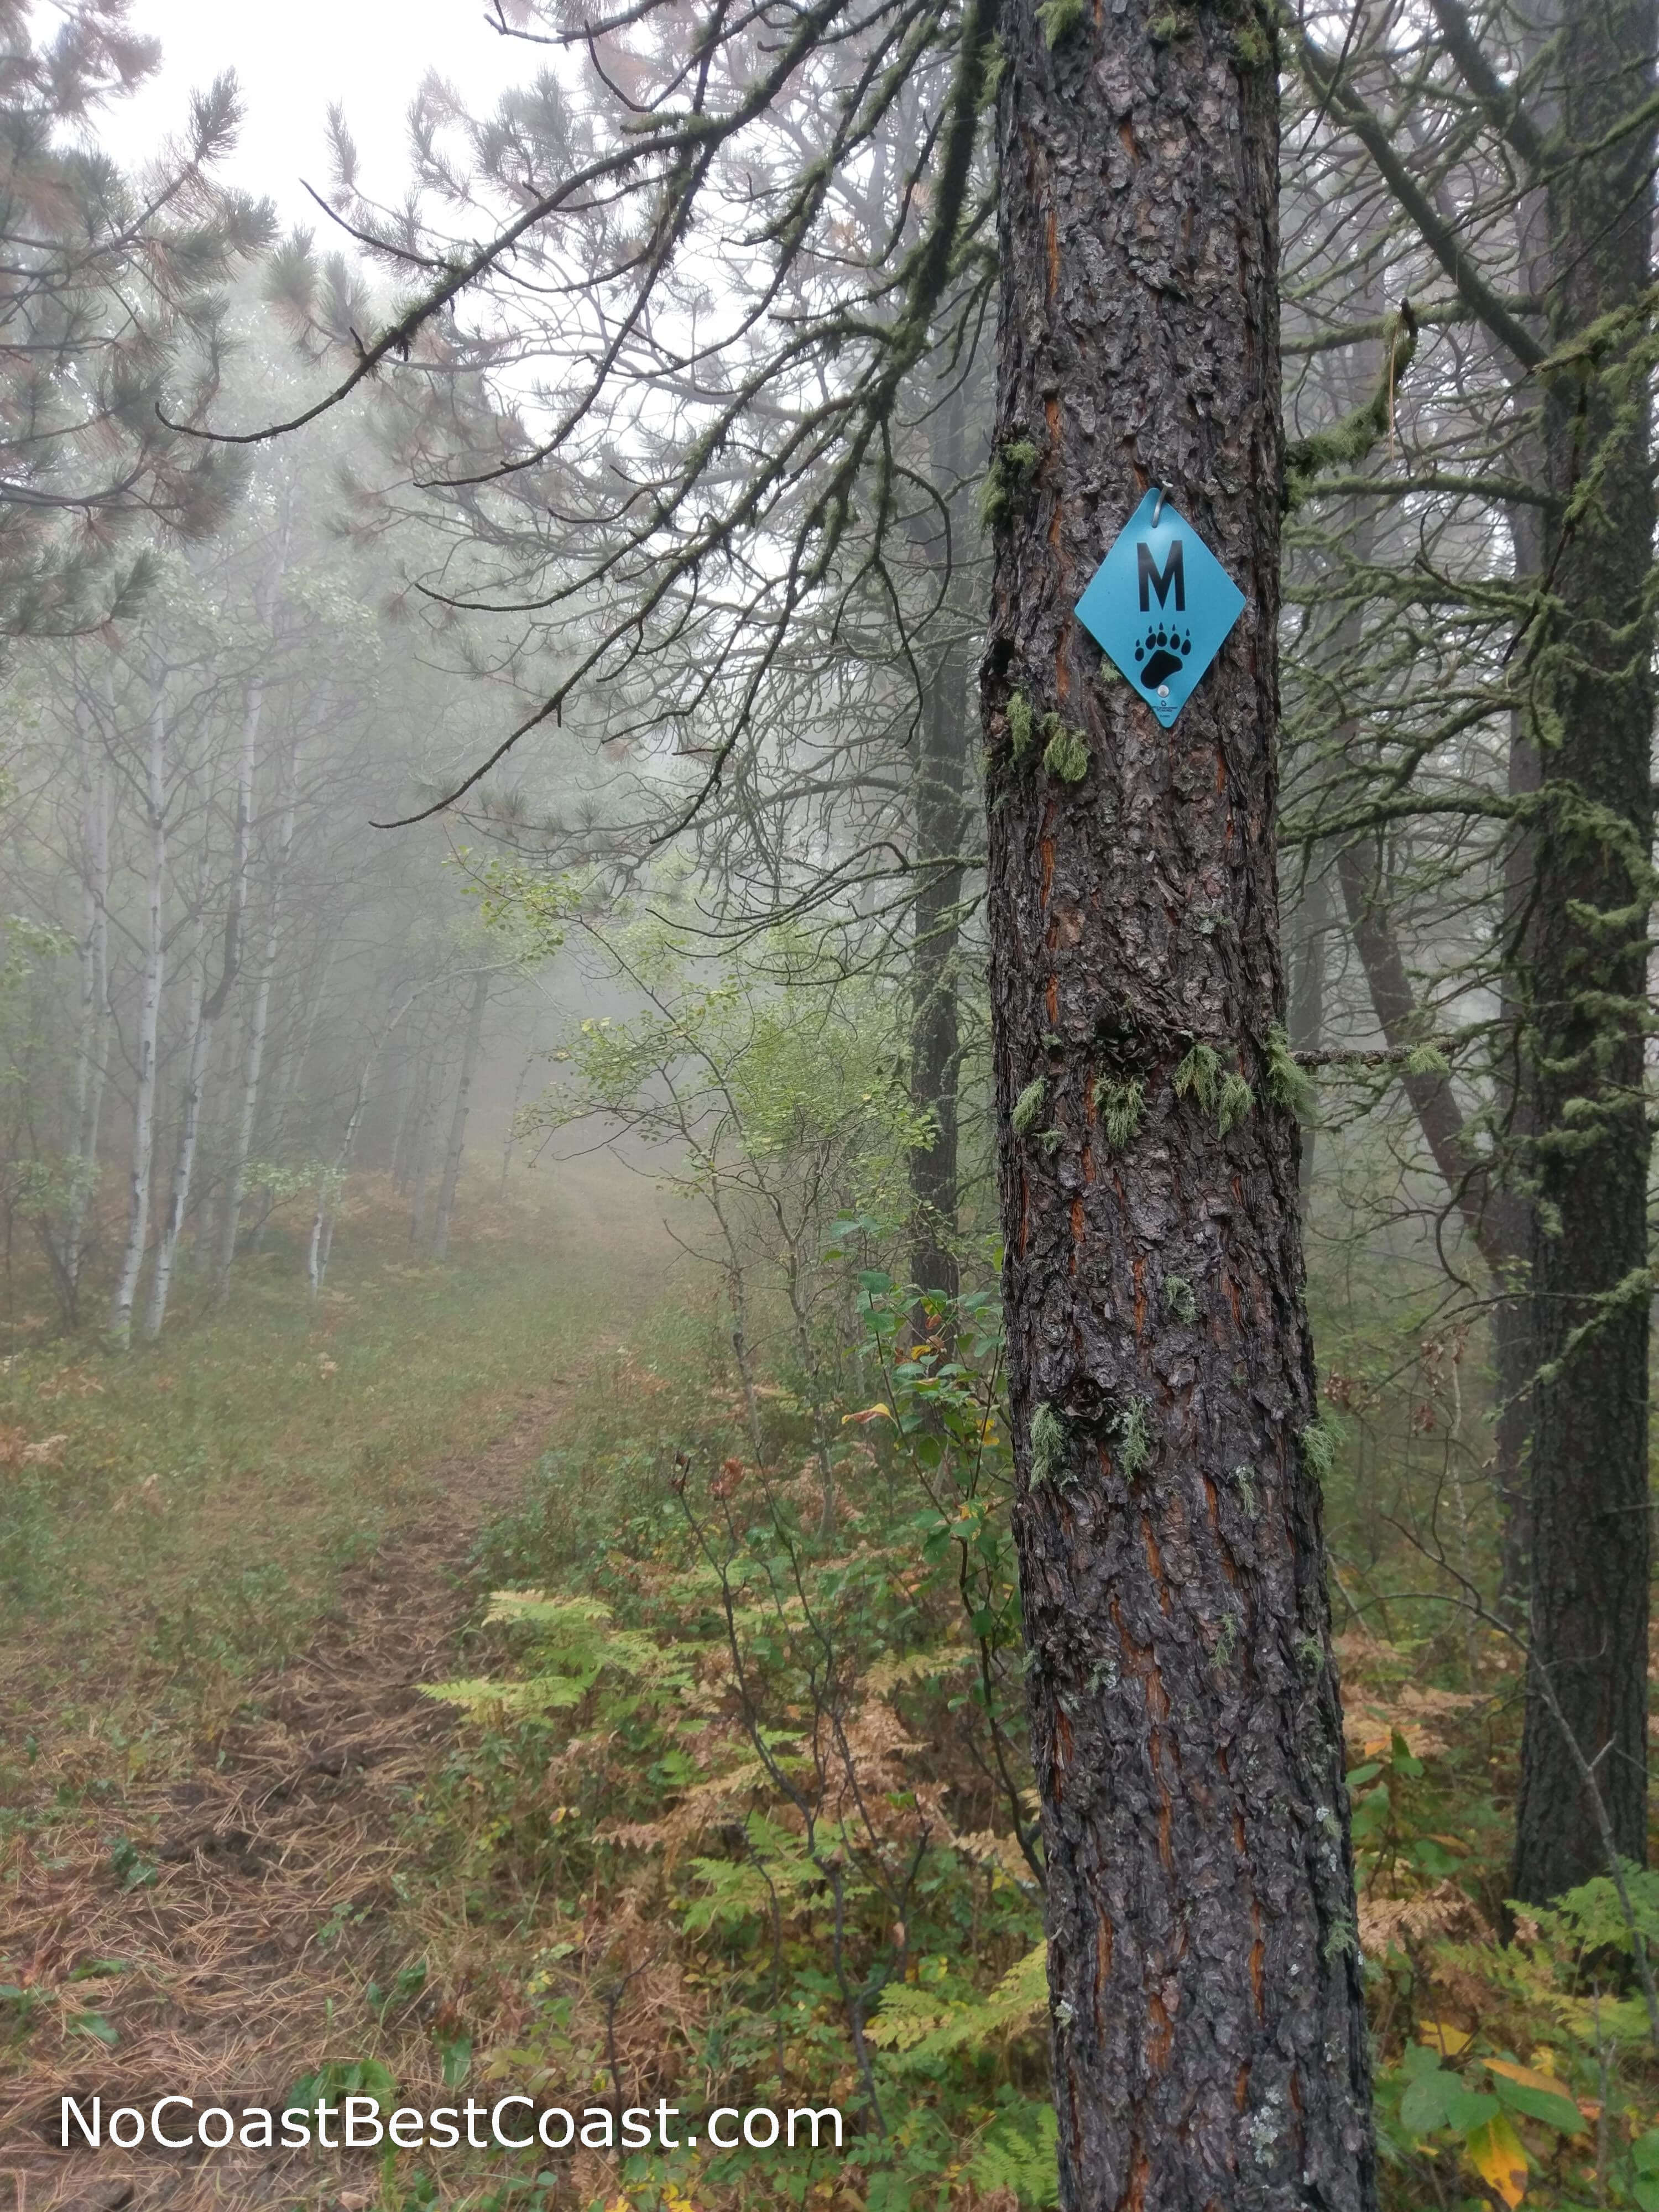 Blue blazes with the letter M mark the Sheepnose Mountain Trail